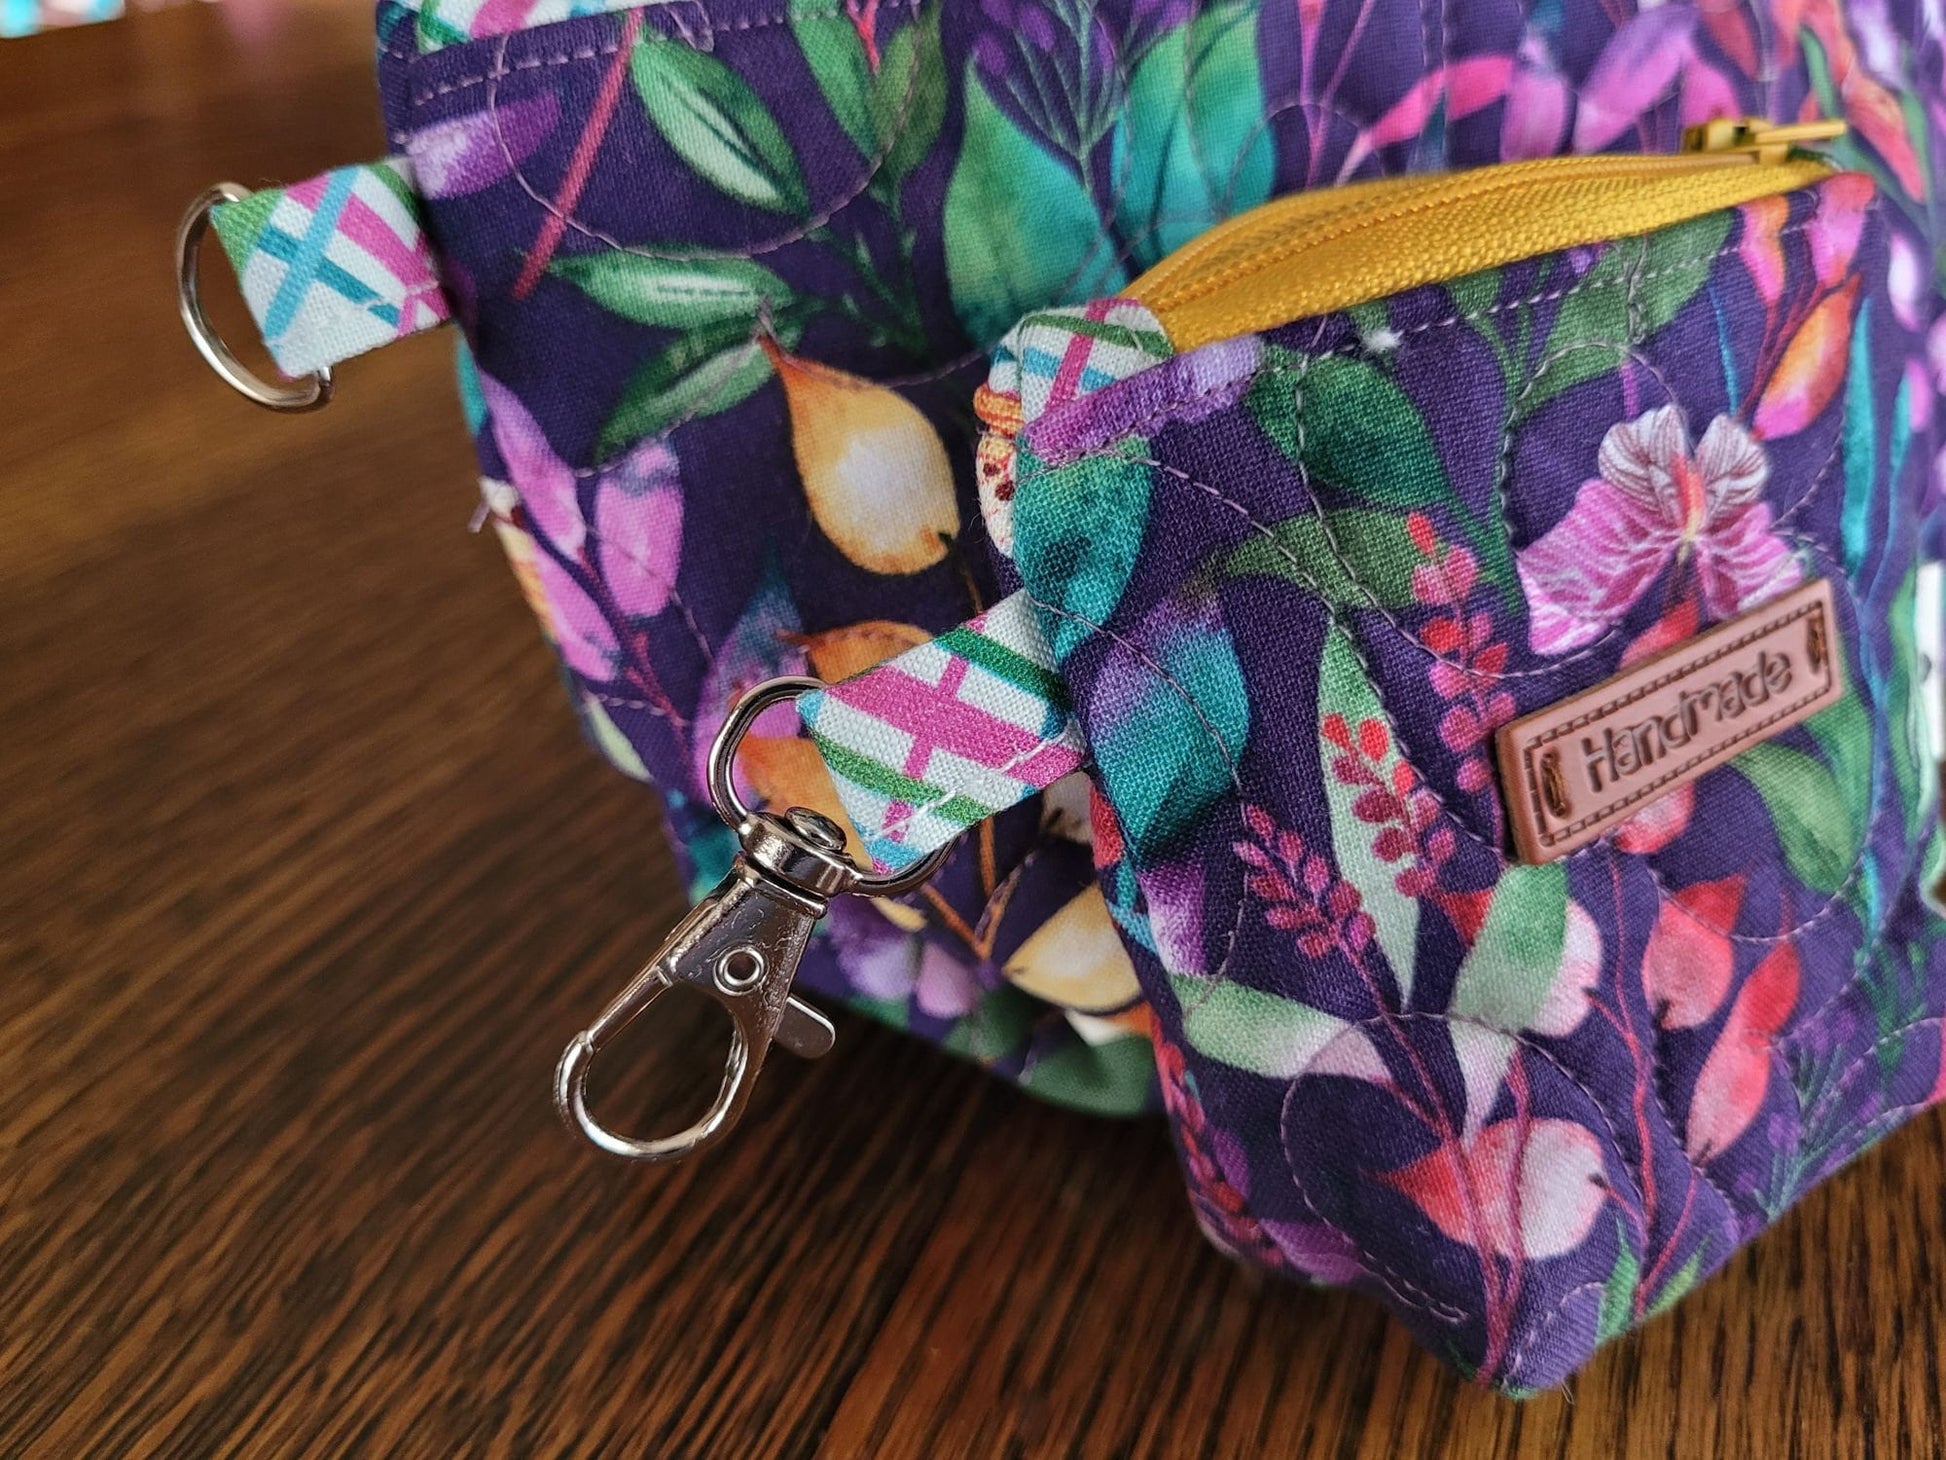 Quilted Cosmetic Bag Set | Cute Travel Toiletry Bag | Small Zipper Pouch | Purple Floral Stash Bag